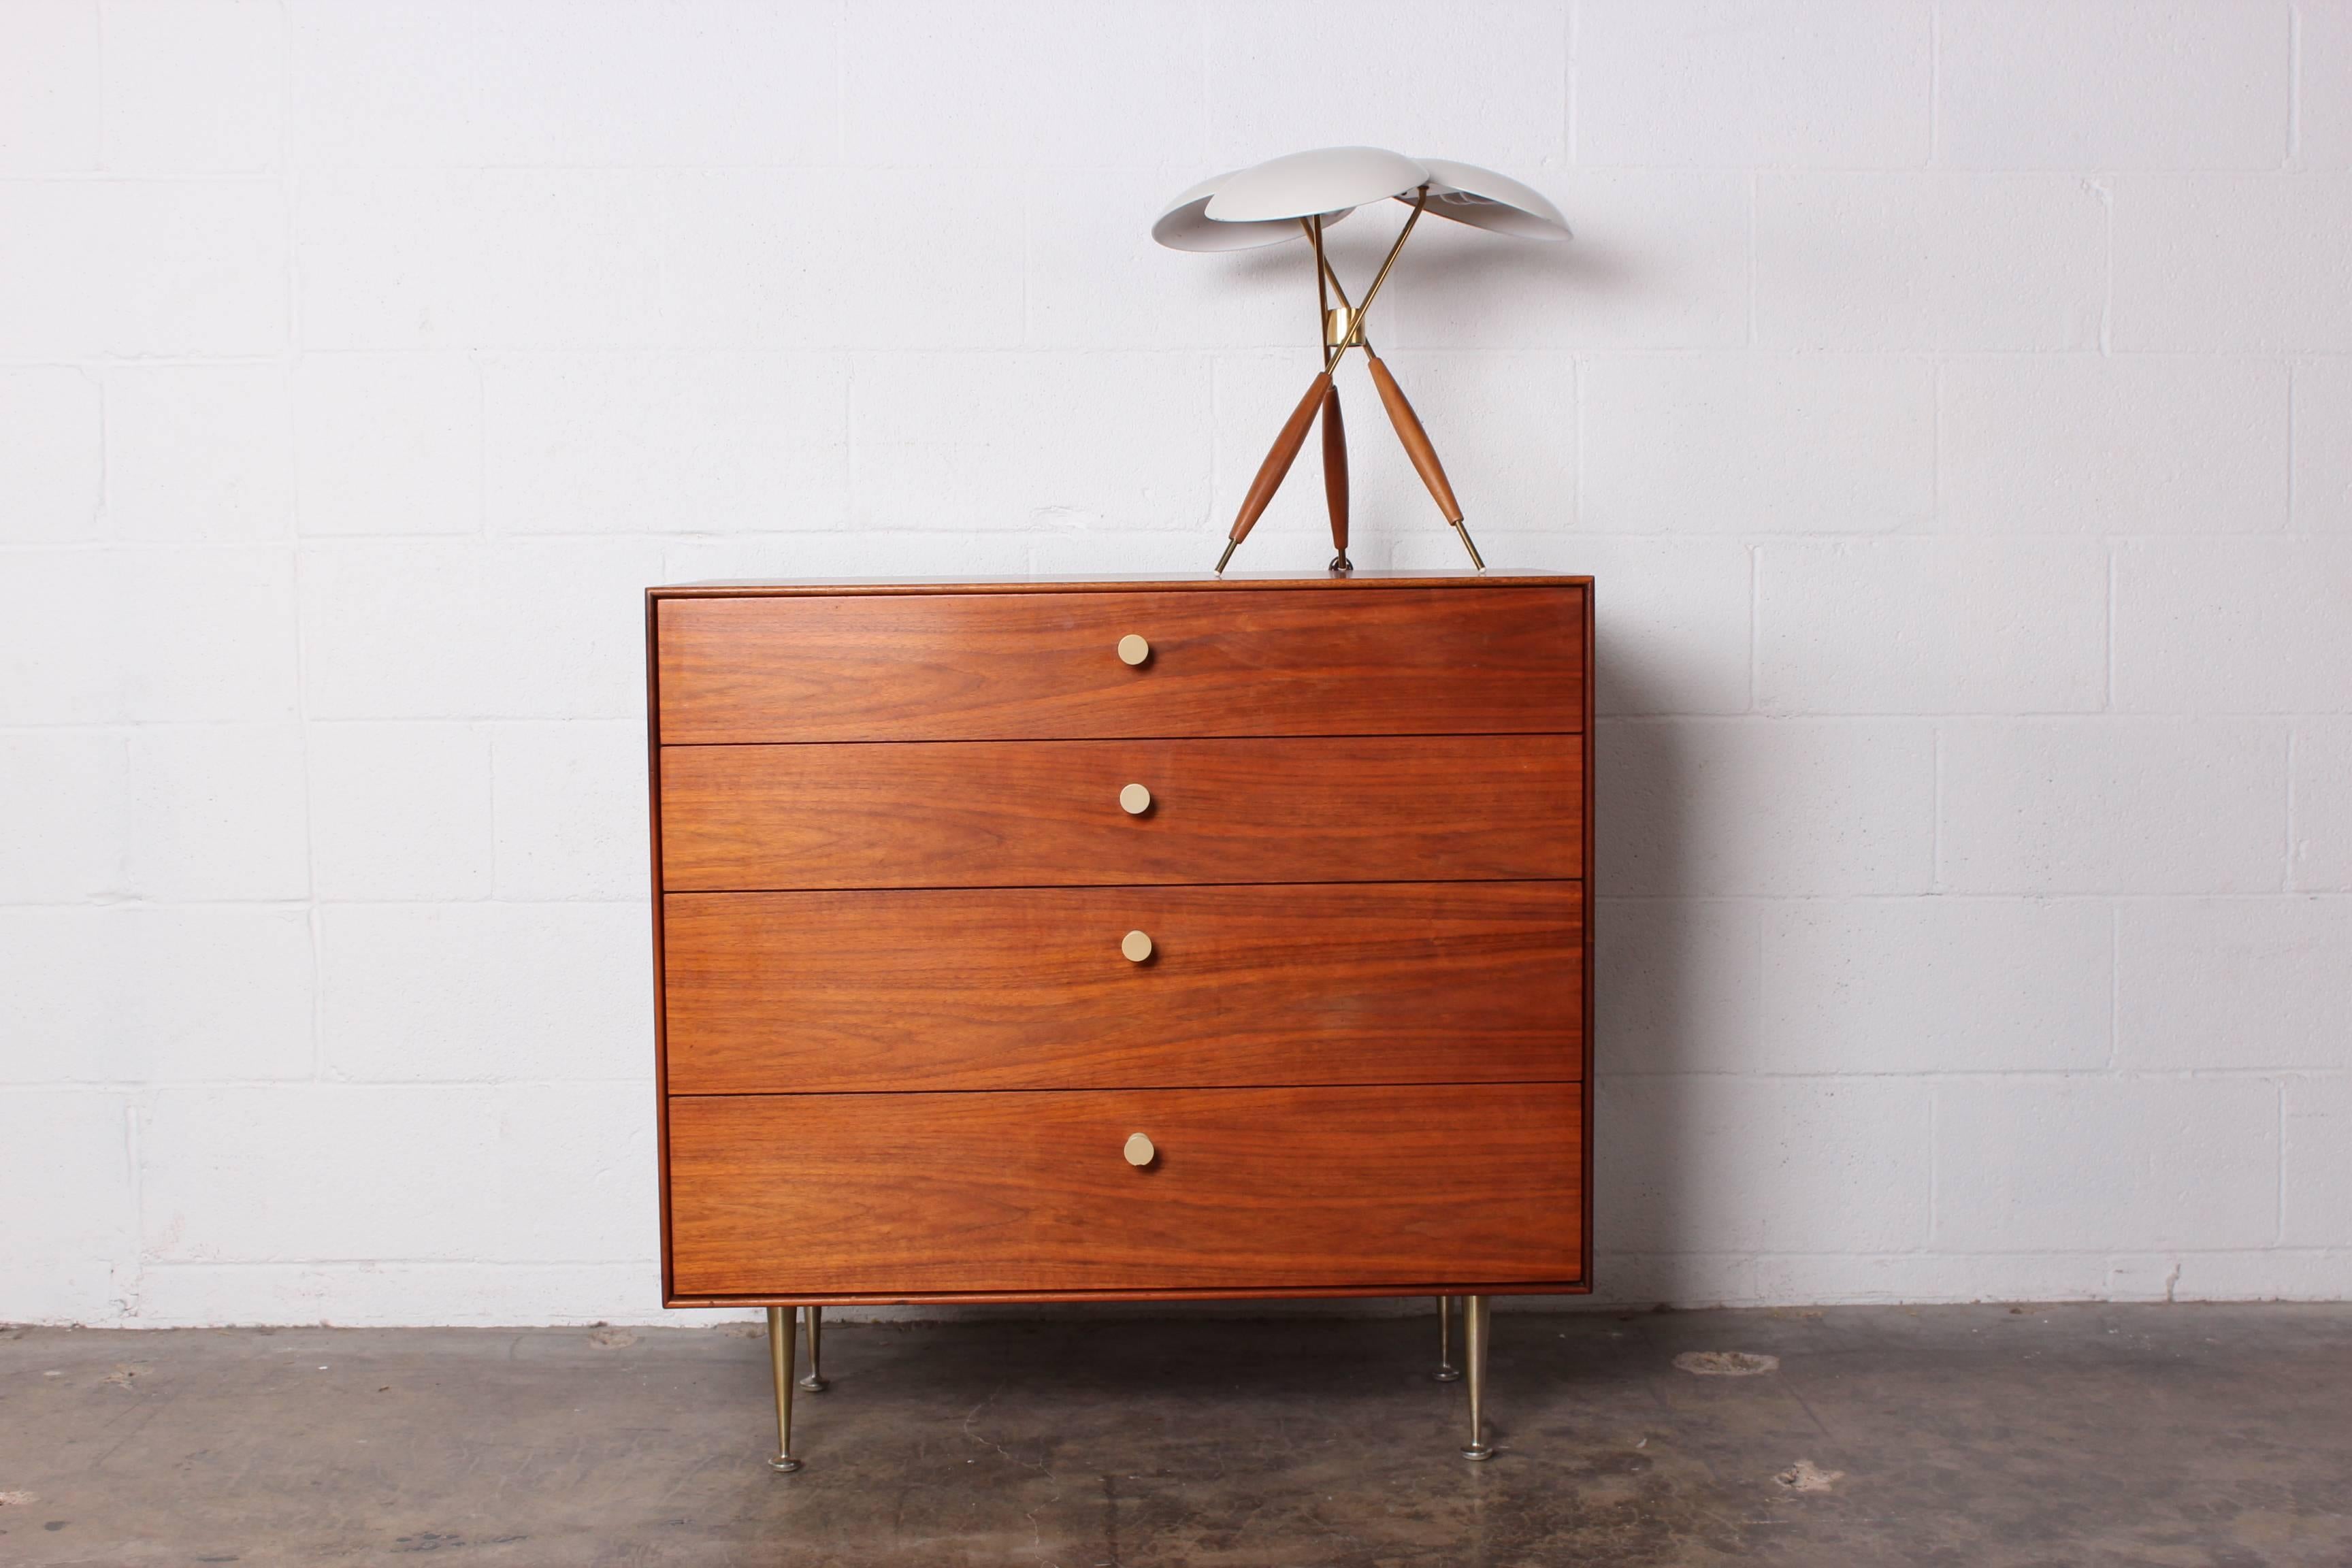 A teak thin edge dresser with original porcelain pulls and metal legs. Designed by George Nelson for Herman Miller.